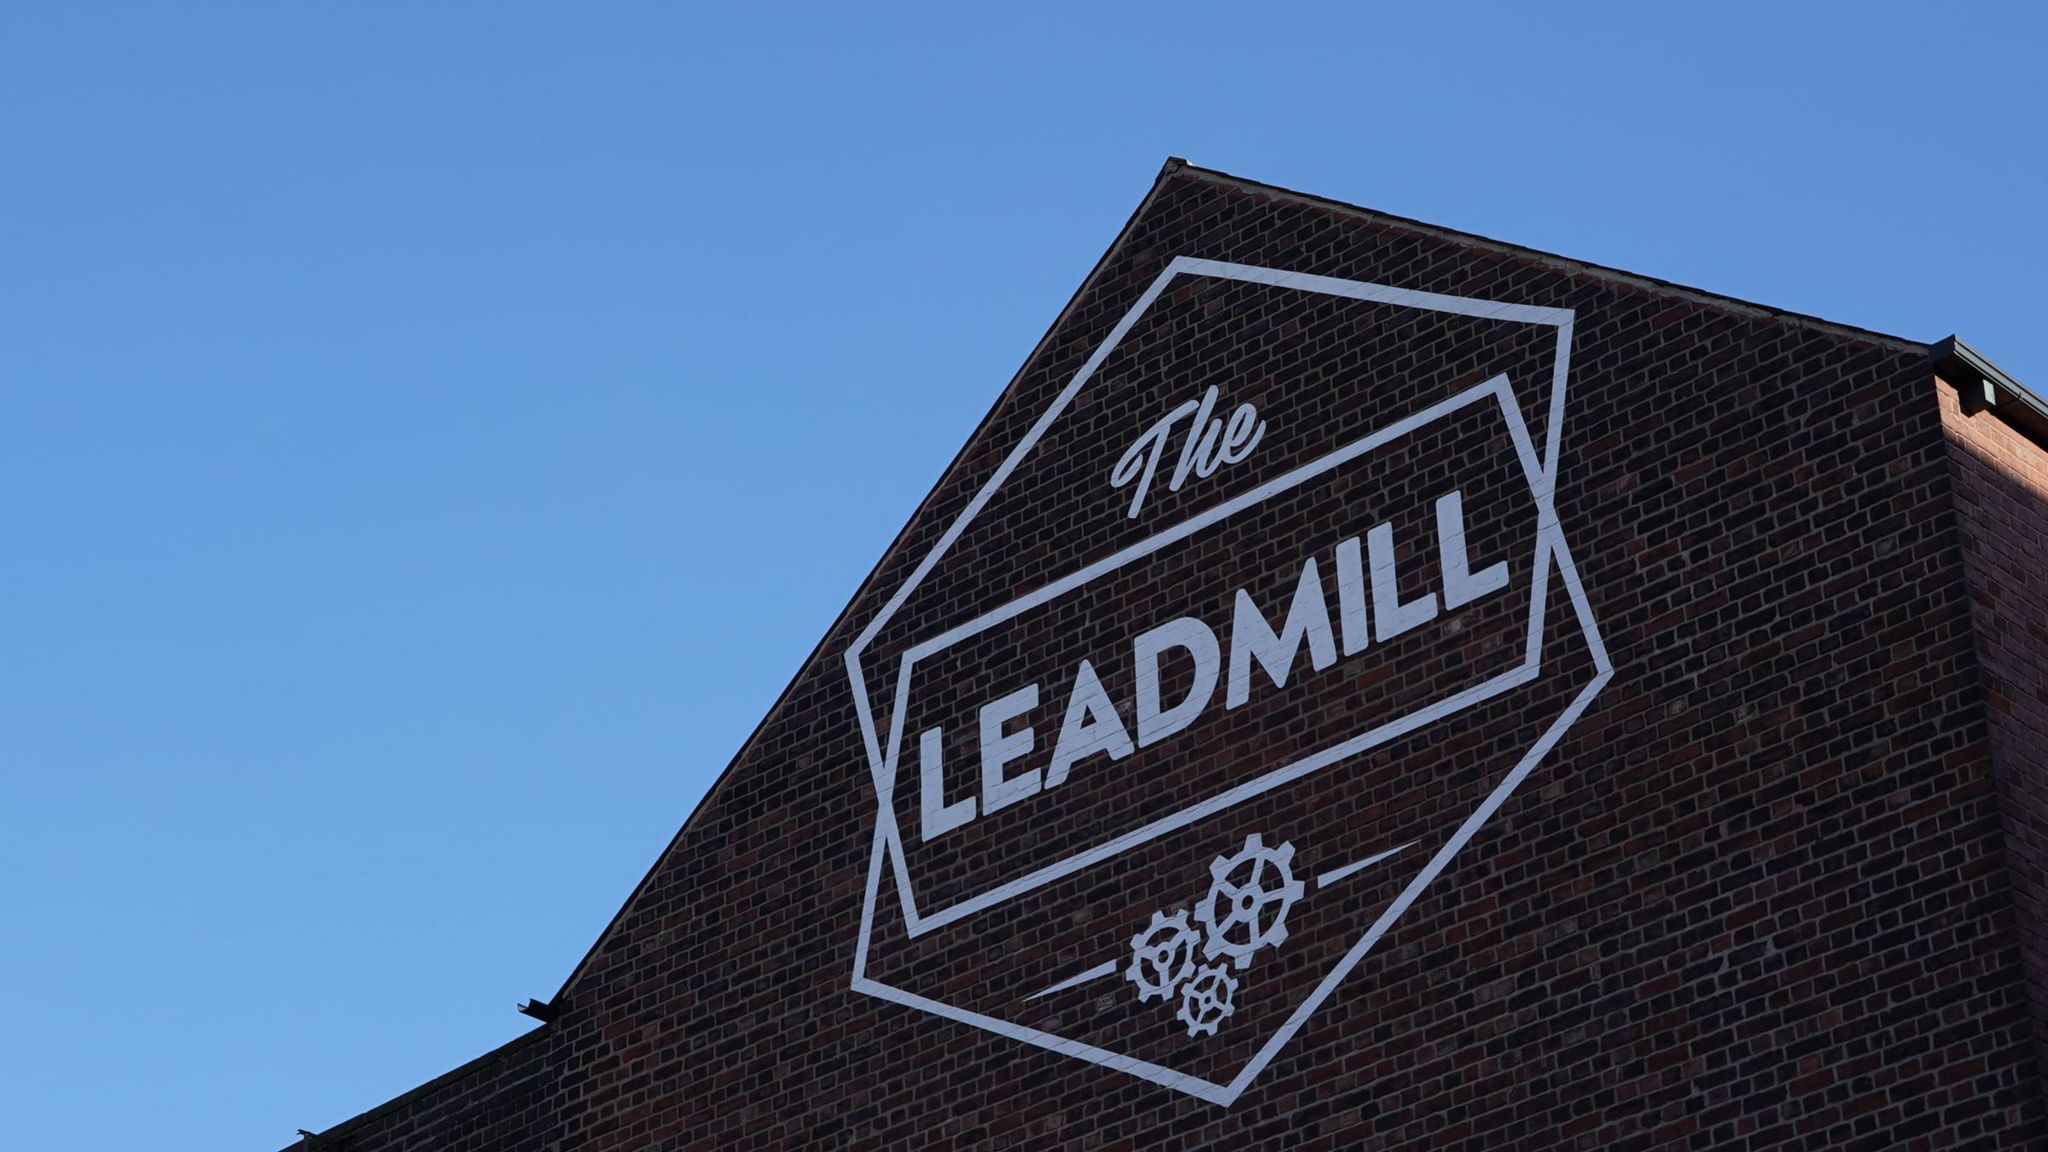 Leadmill sign